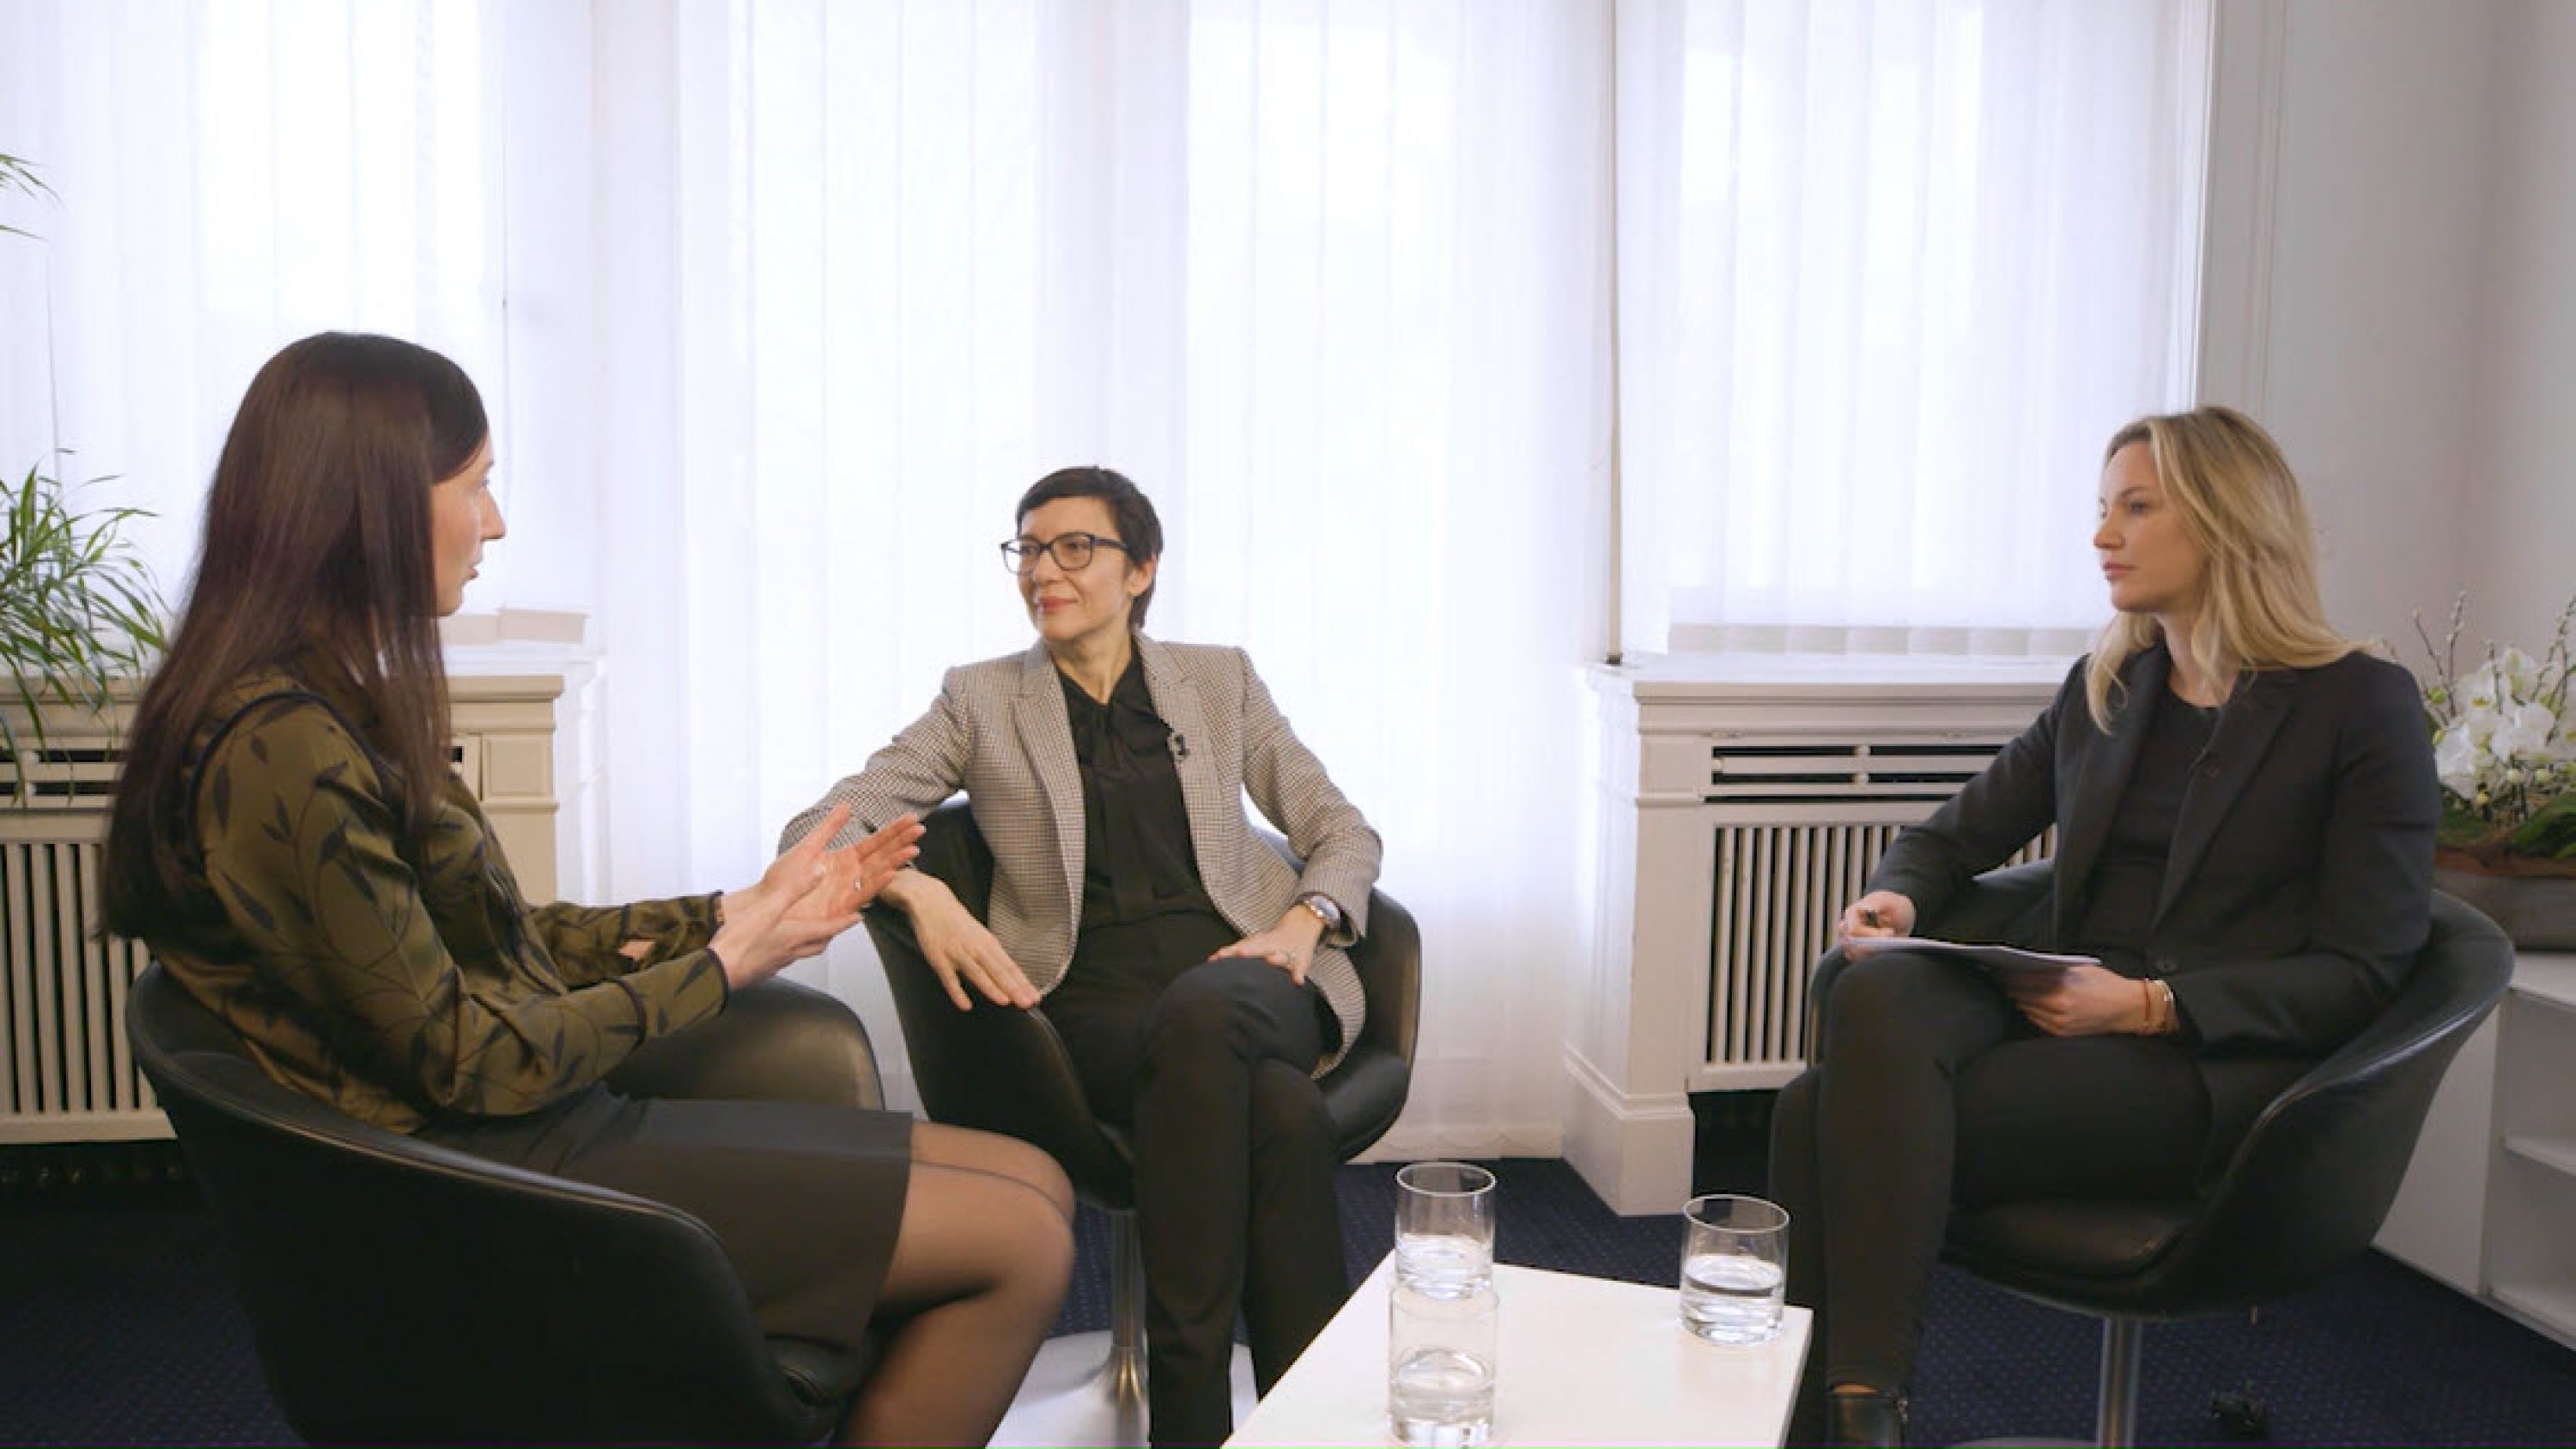 Simone Stebler In Conversation with UBS General Counsel Maria Leistner and Her Mentee on Supporting the Next Generation of Leaders